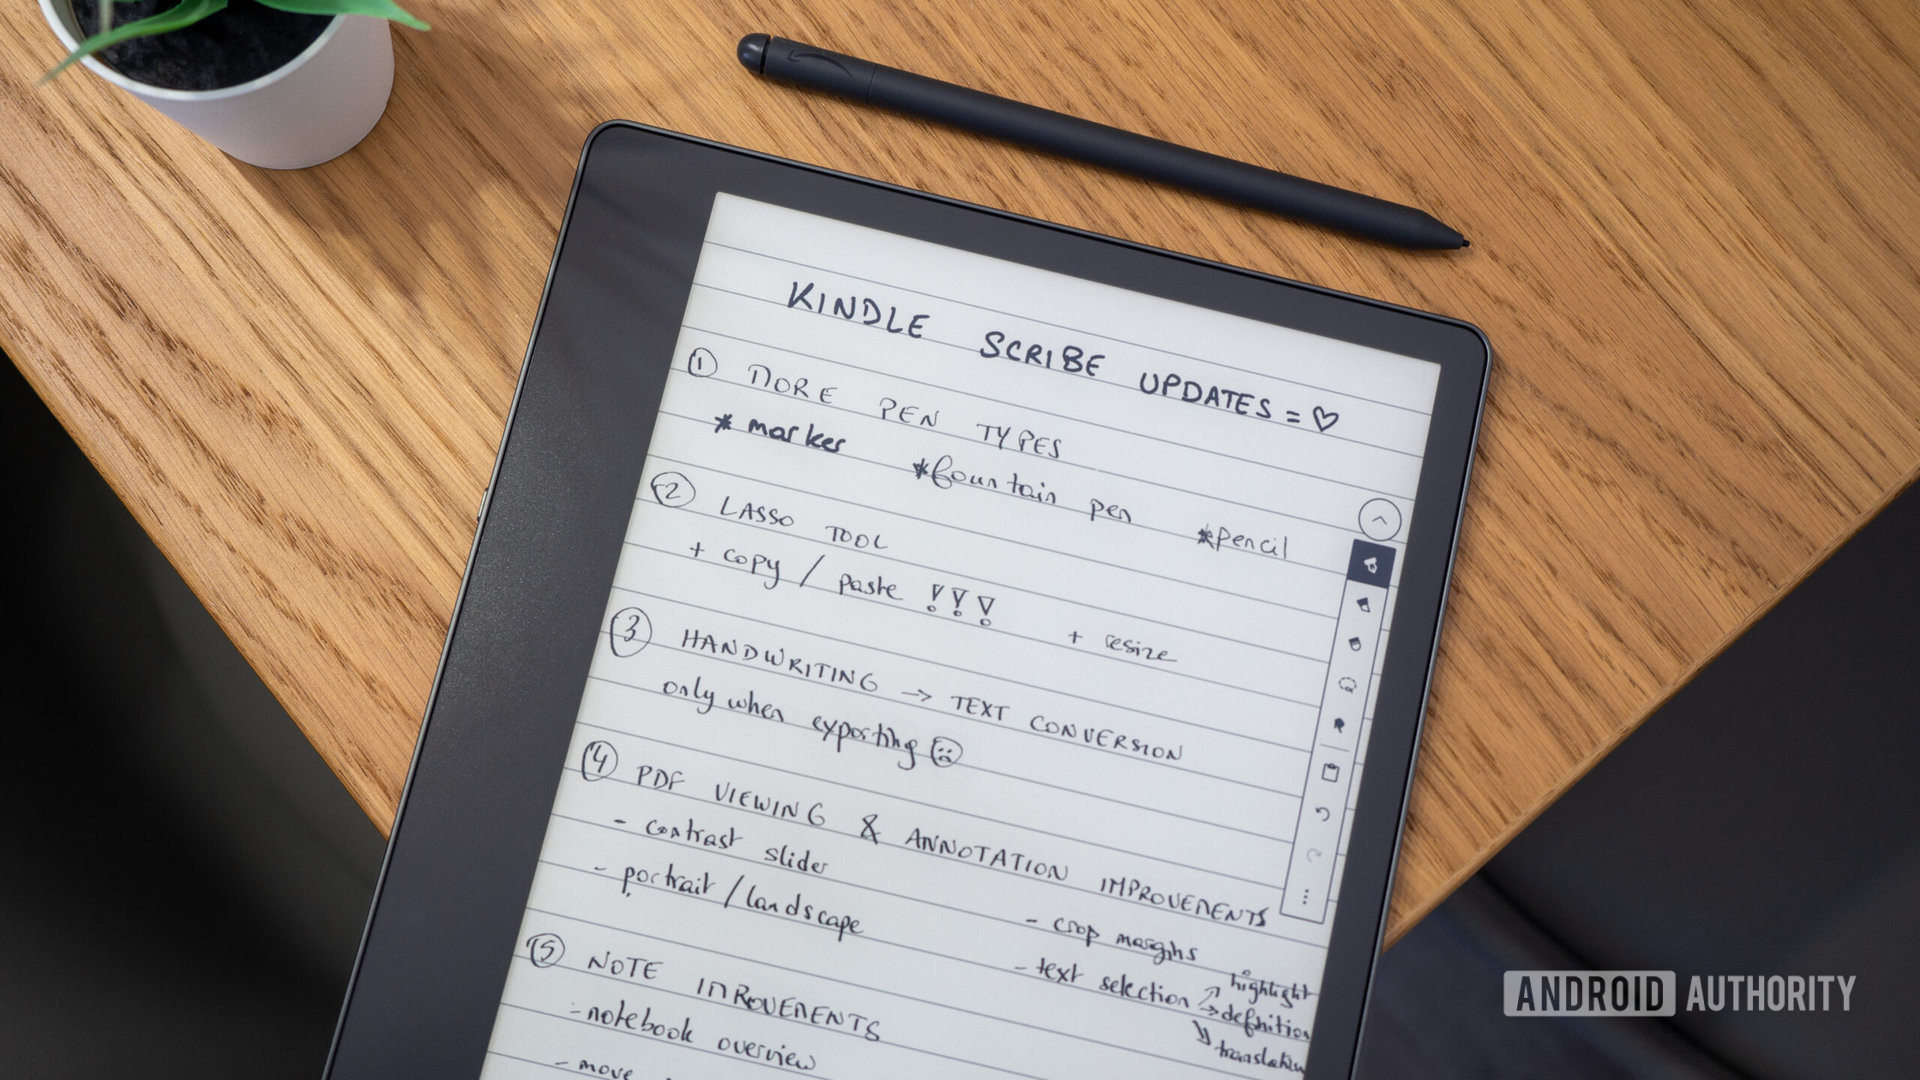 The Kindle Scribe is finally a good note-taking tablet and comic book reader